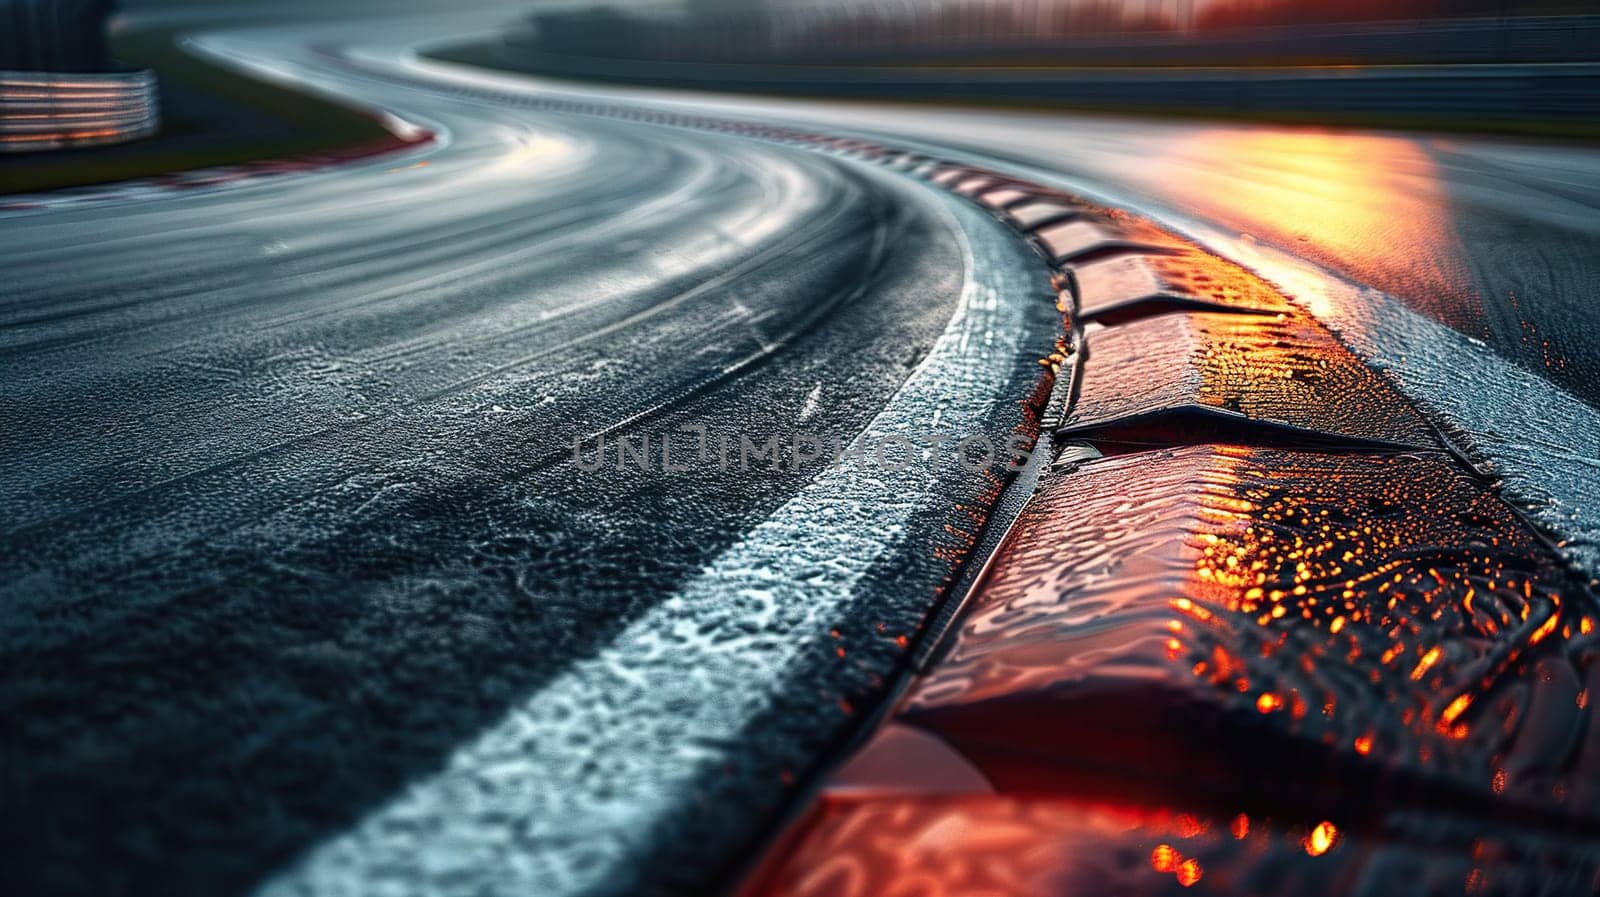 Close-up of a race track in cloudy weather. Concept of racing competition, high speed.